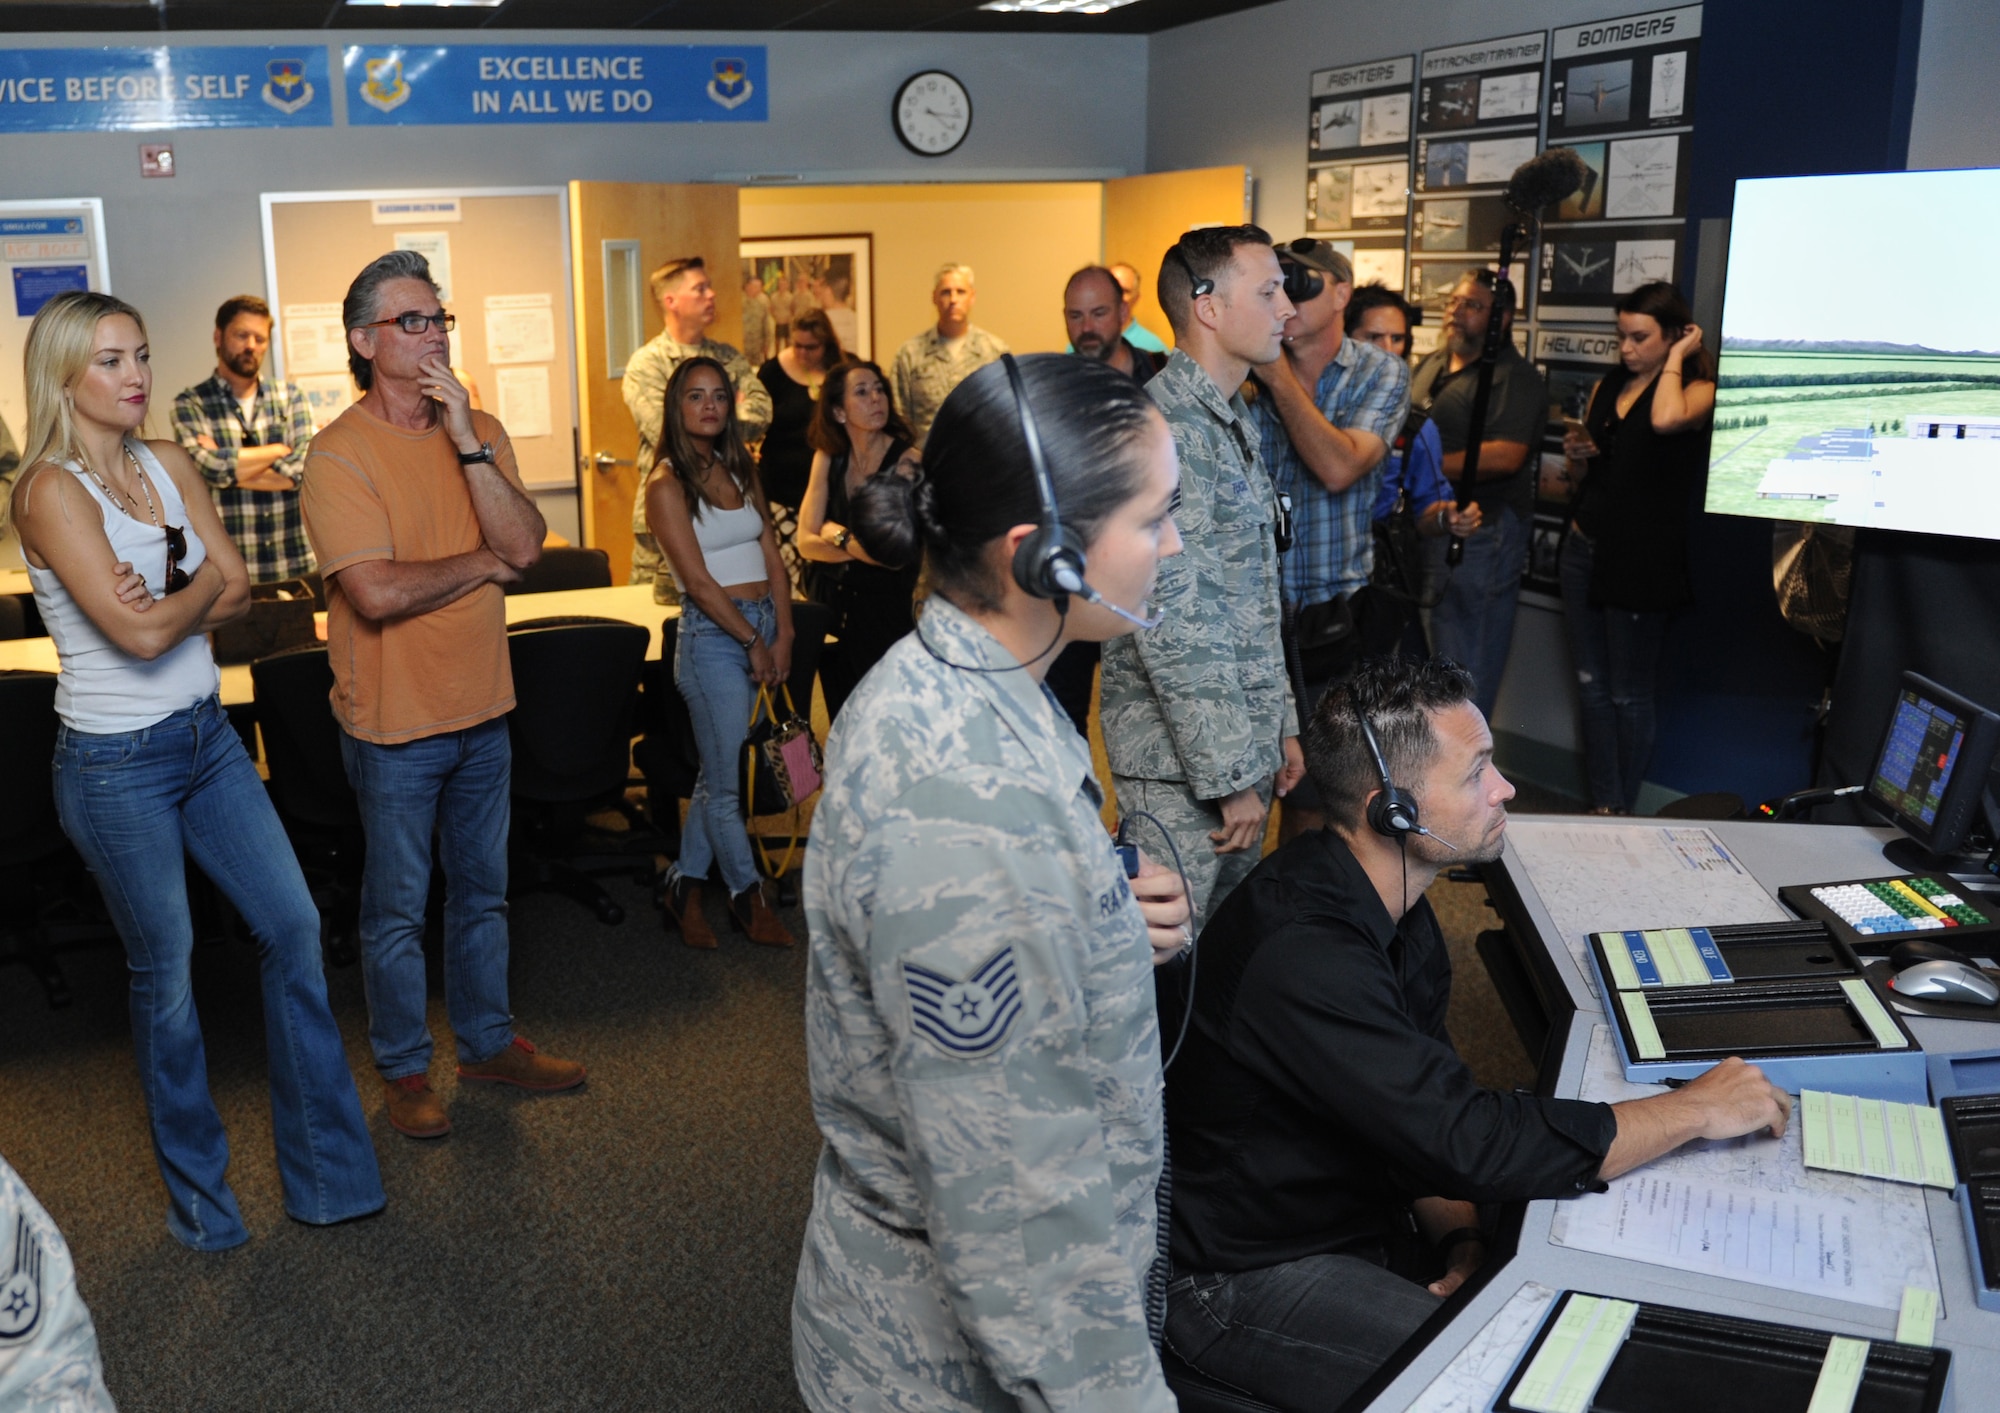 Kate Hudson and Kurt Russel, Deepwater Horizon actors, receive a tour of the 334th Training Squadron air traffic control tower simulator at Cody Hall before the Deepwater Horizon movie screening Sept. 20, 2016, on Keesler Air Force Base, Miss. Before the screening, Russell, Hudson and movie director, Peter Berg, took a short tour of the 81st Training Wing and 403rd Wing to meet with Airmen and learn about their missions at Keesler. (U.S. Air Force photo by Kemberly Groue/Released)